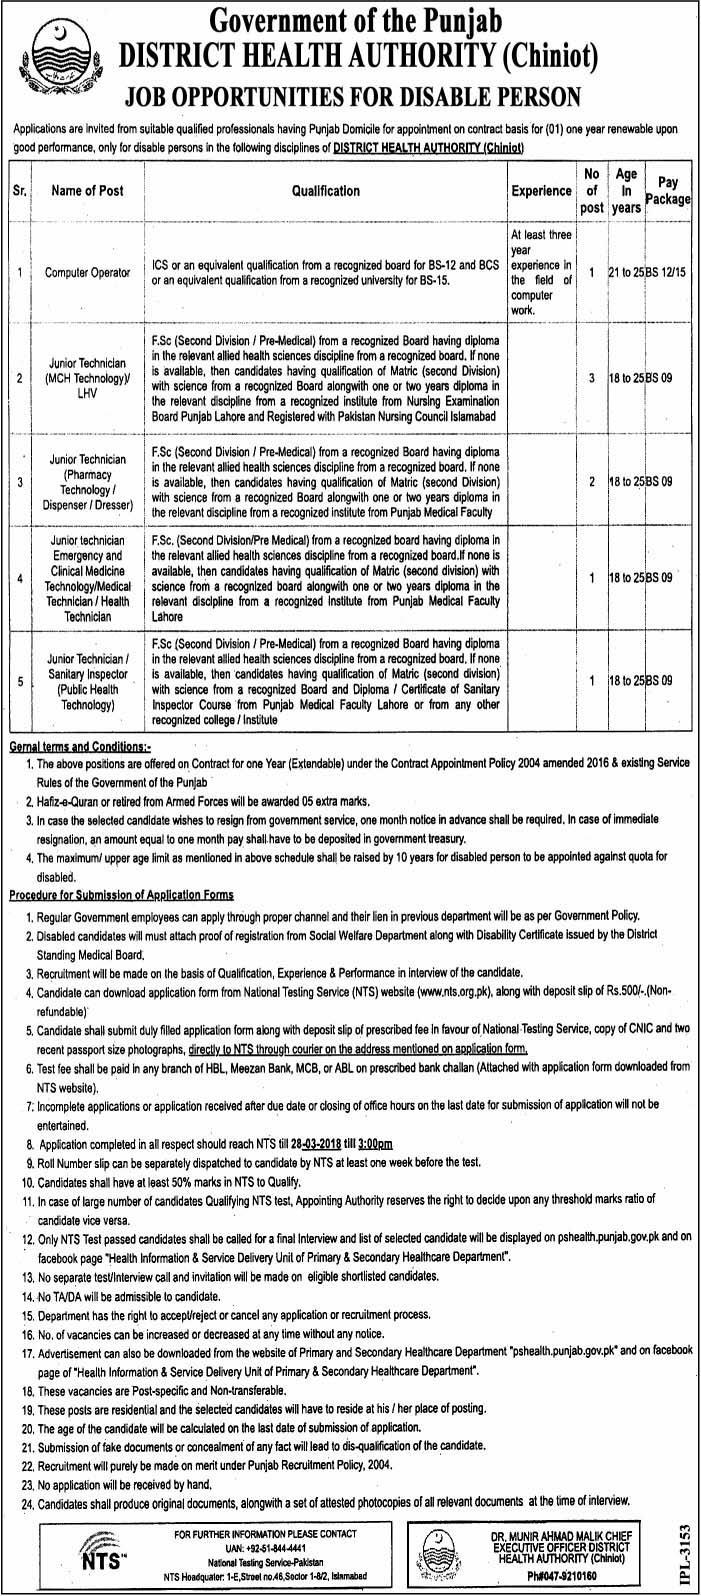 District Health Authority Chiniot 08 Jobs Daily Express Newspaper 12 March 2018